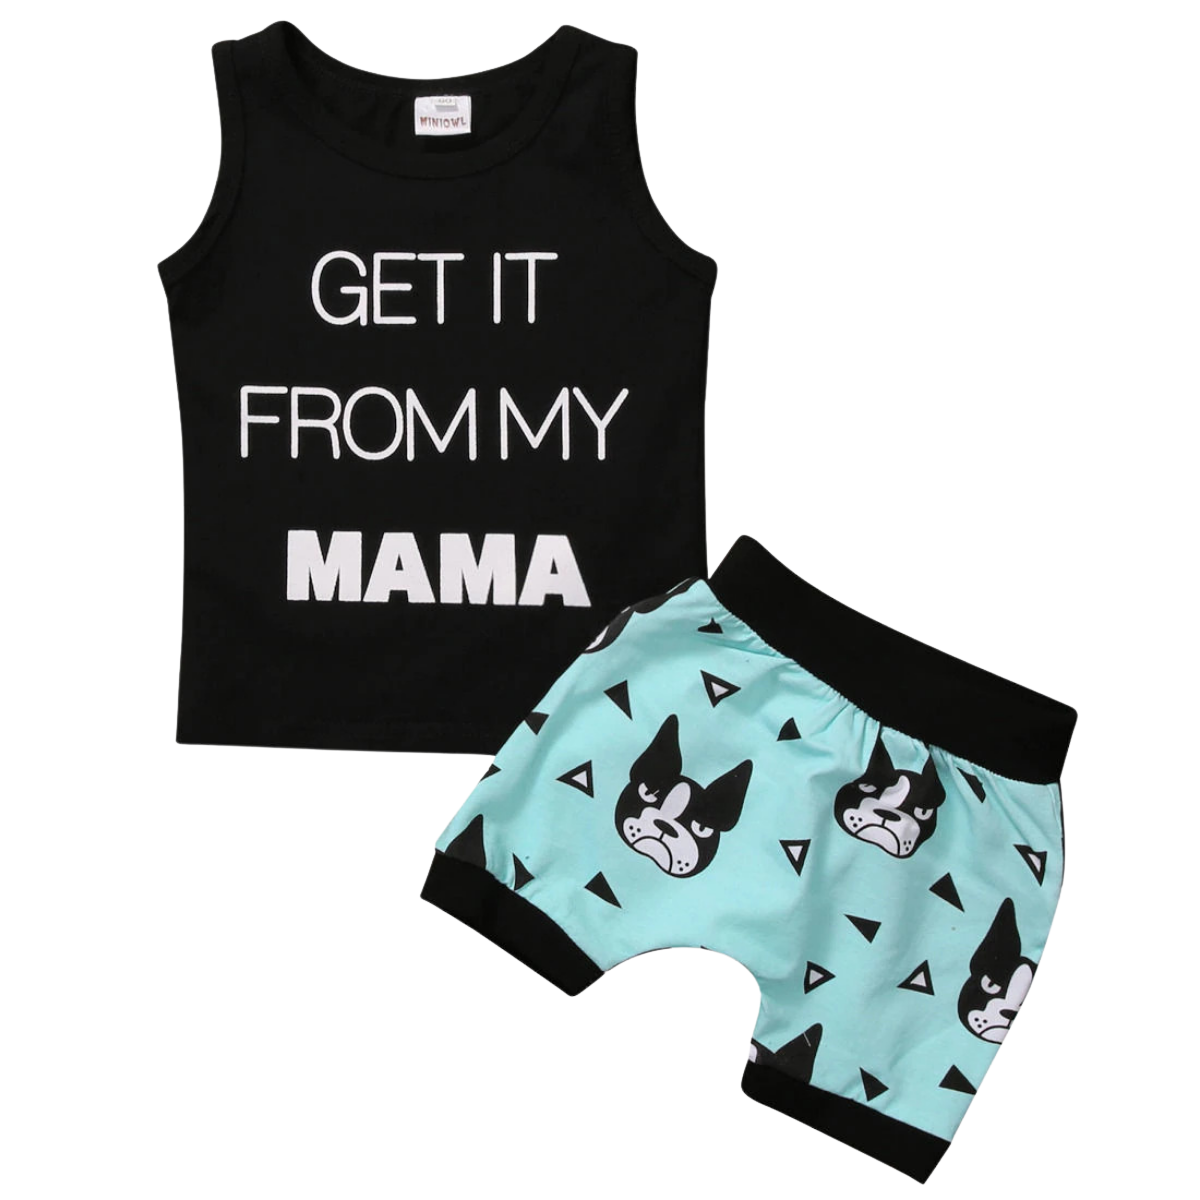 Get it From my Mama Baby Clothing Set